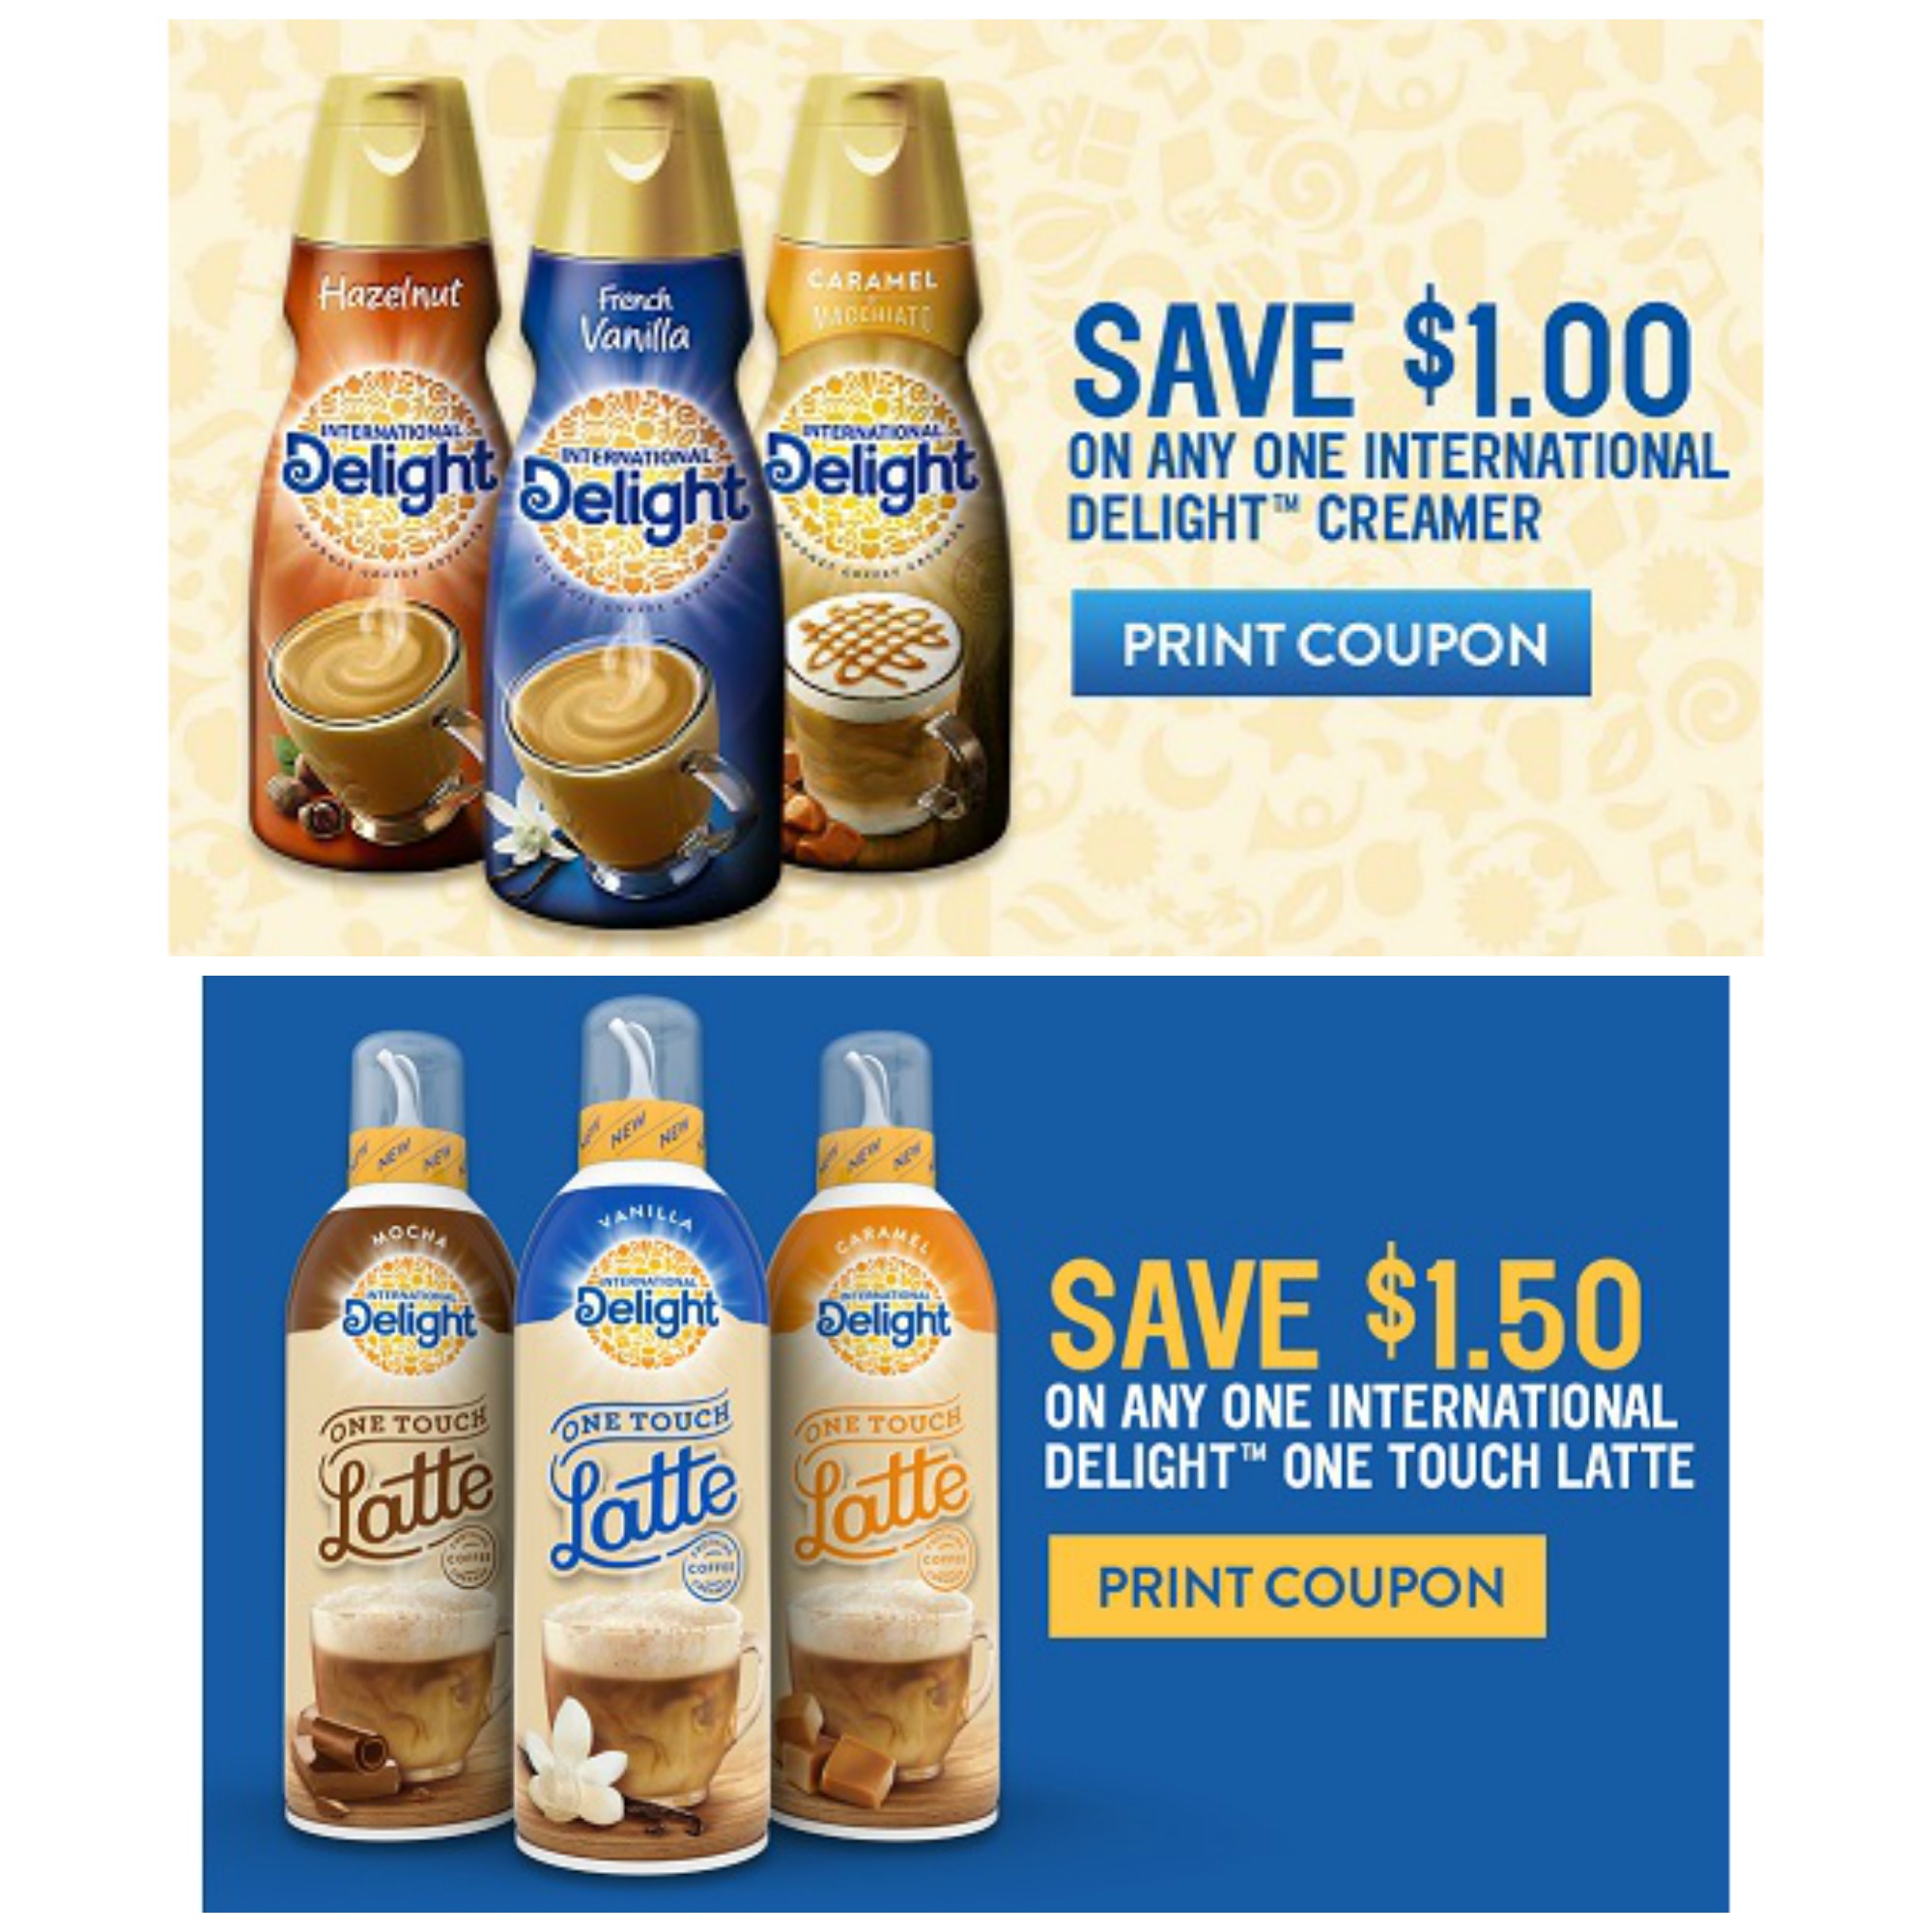 NEW International Delight coupons!  High Value!